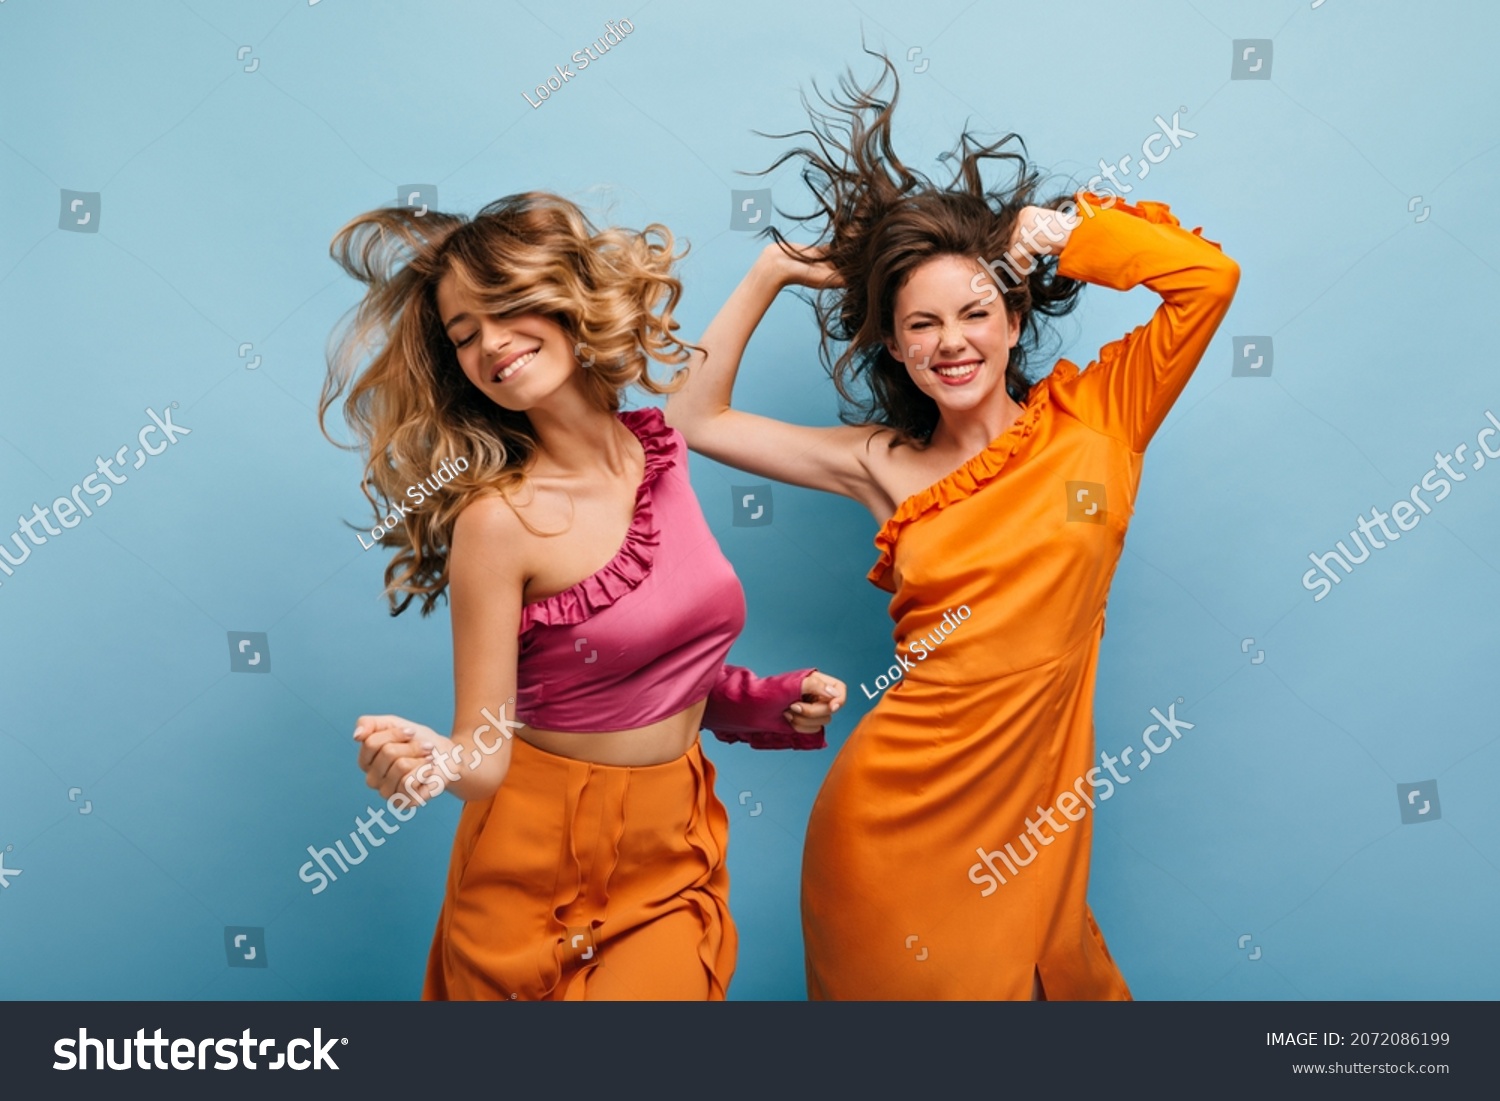 Cheerful showy caucasian young women fooling around on isolated blue background. Their wavy, loose hair flies in all directions. Girls are dressed in bright summer outfits. #2072086199